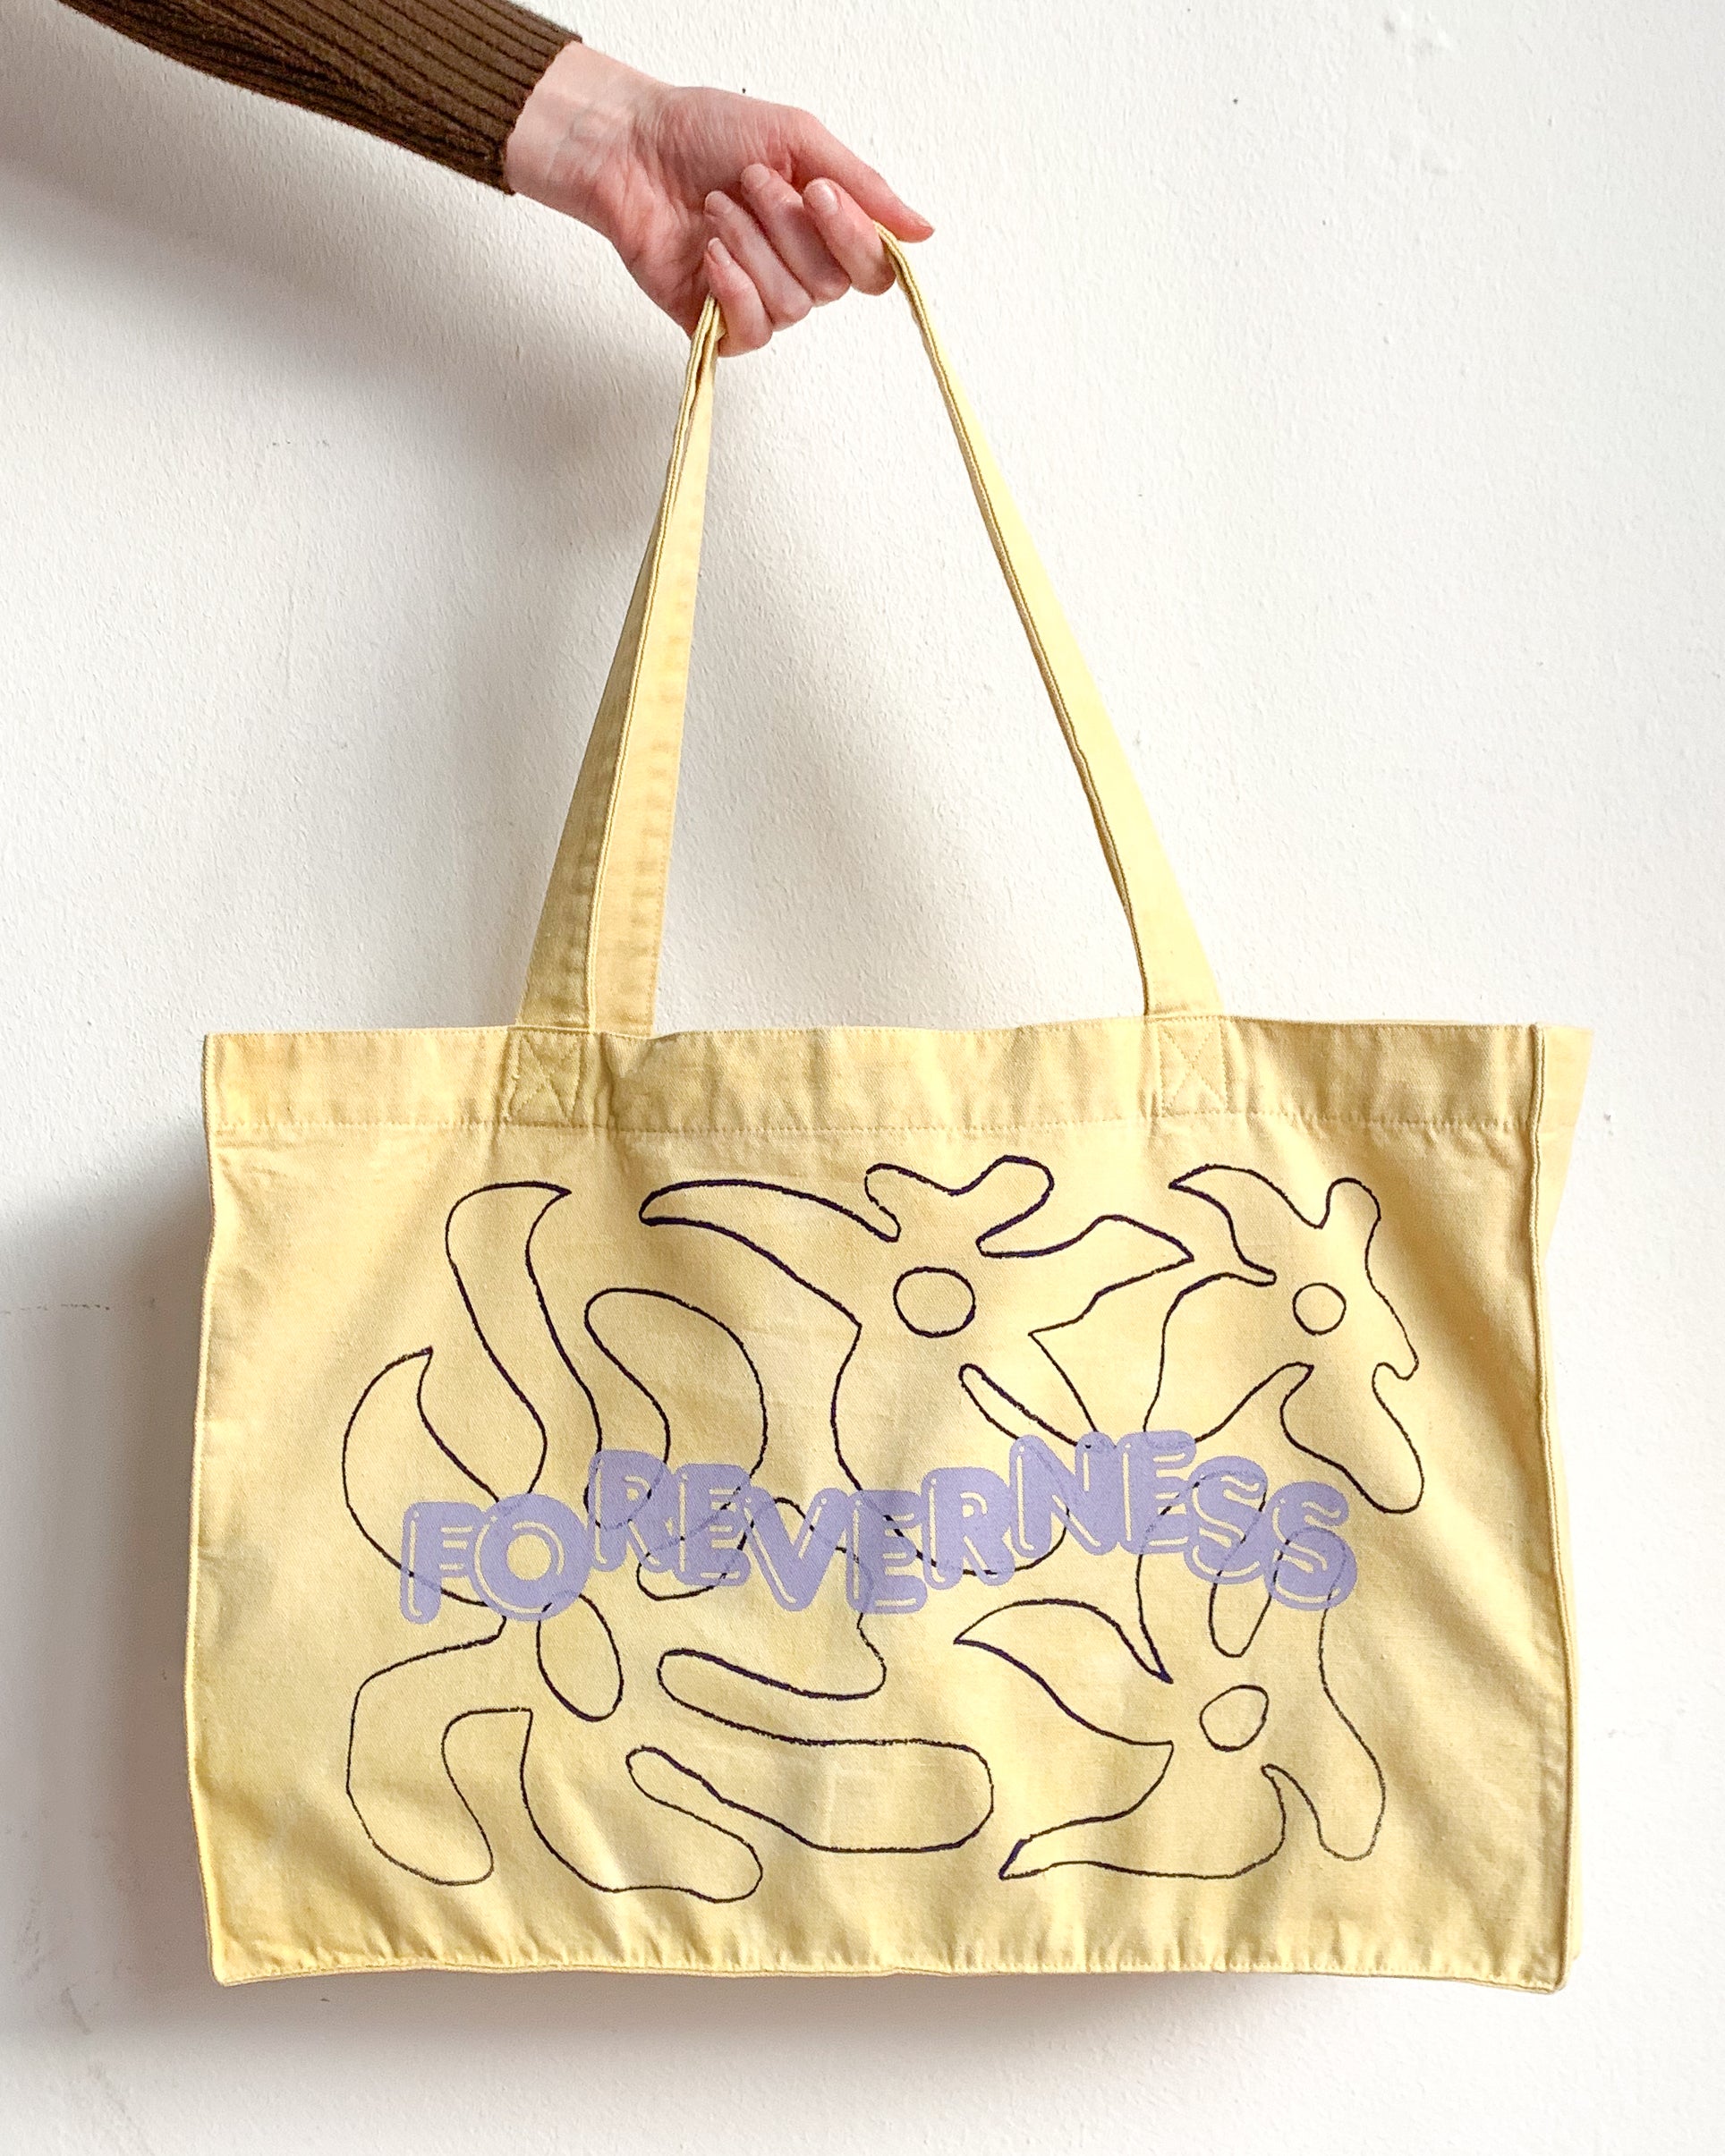 Everybody needs a tote bag, why not make a bougie 💅🏻 Just in